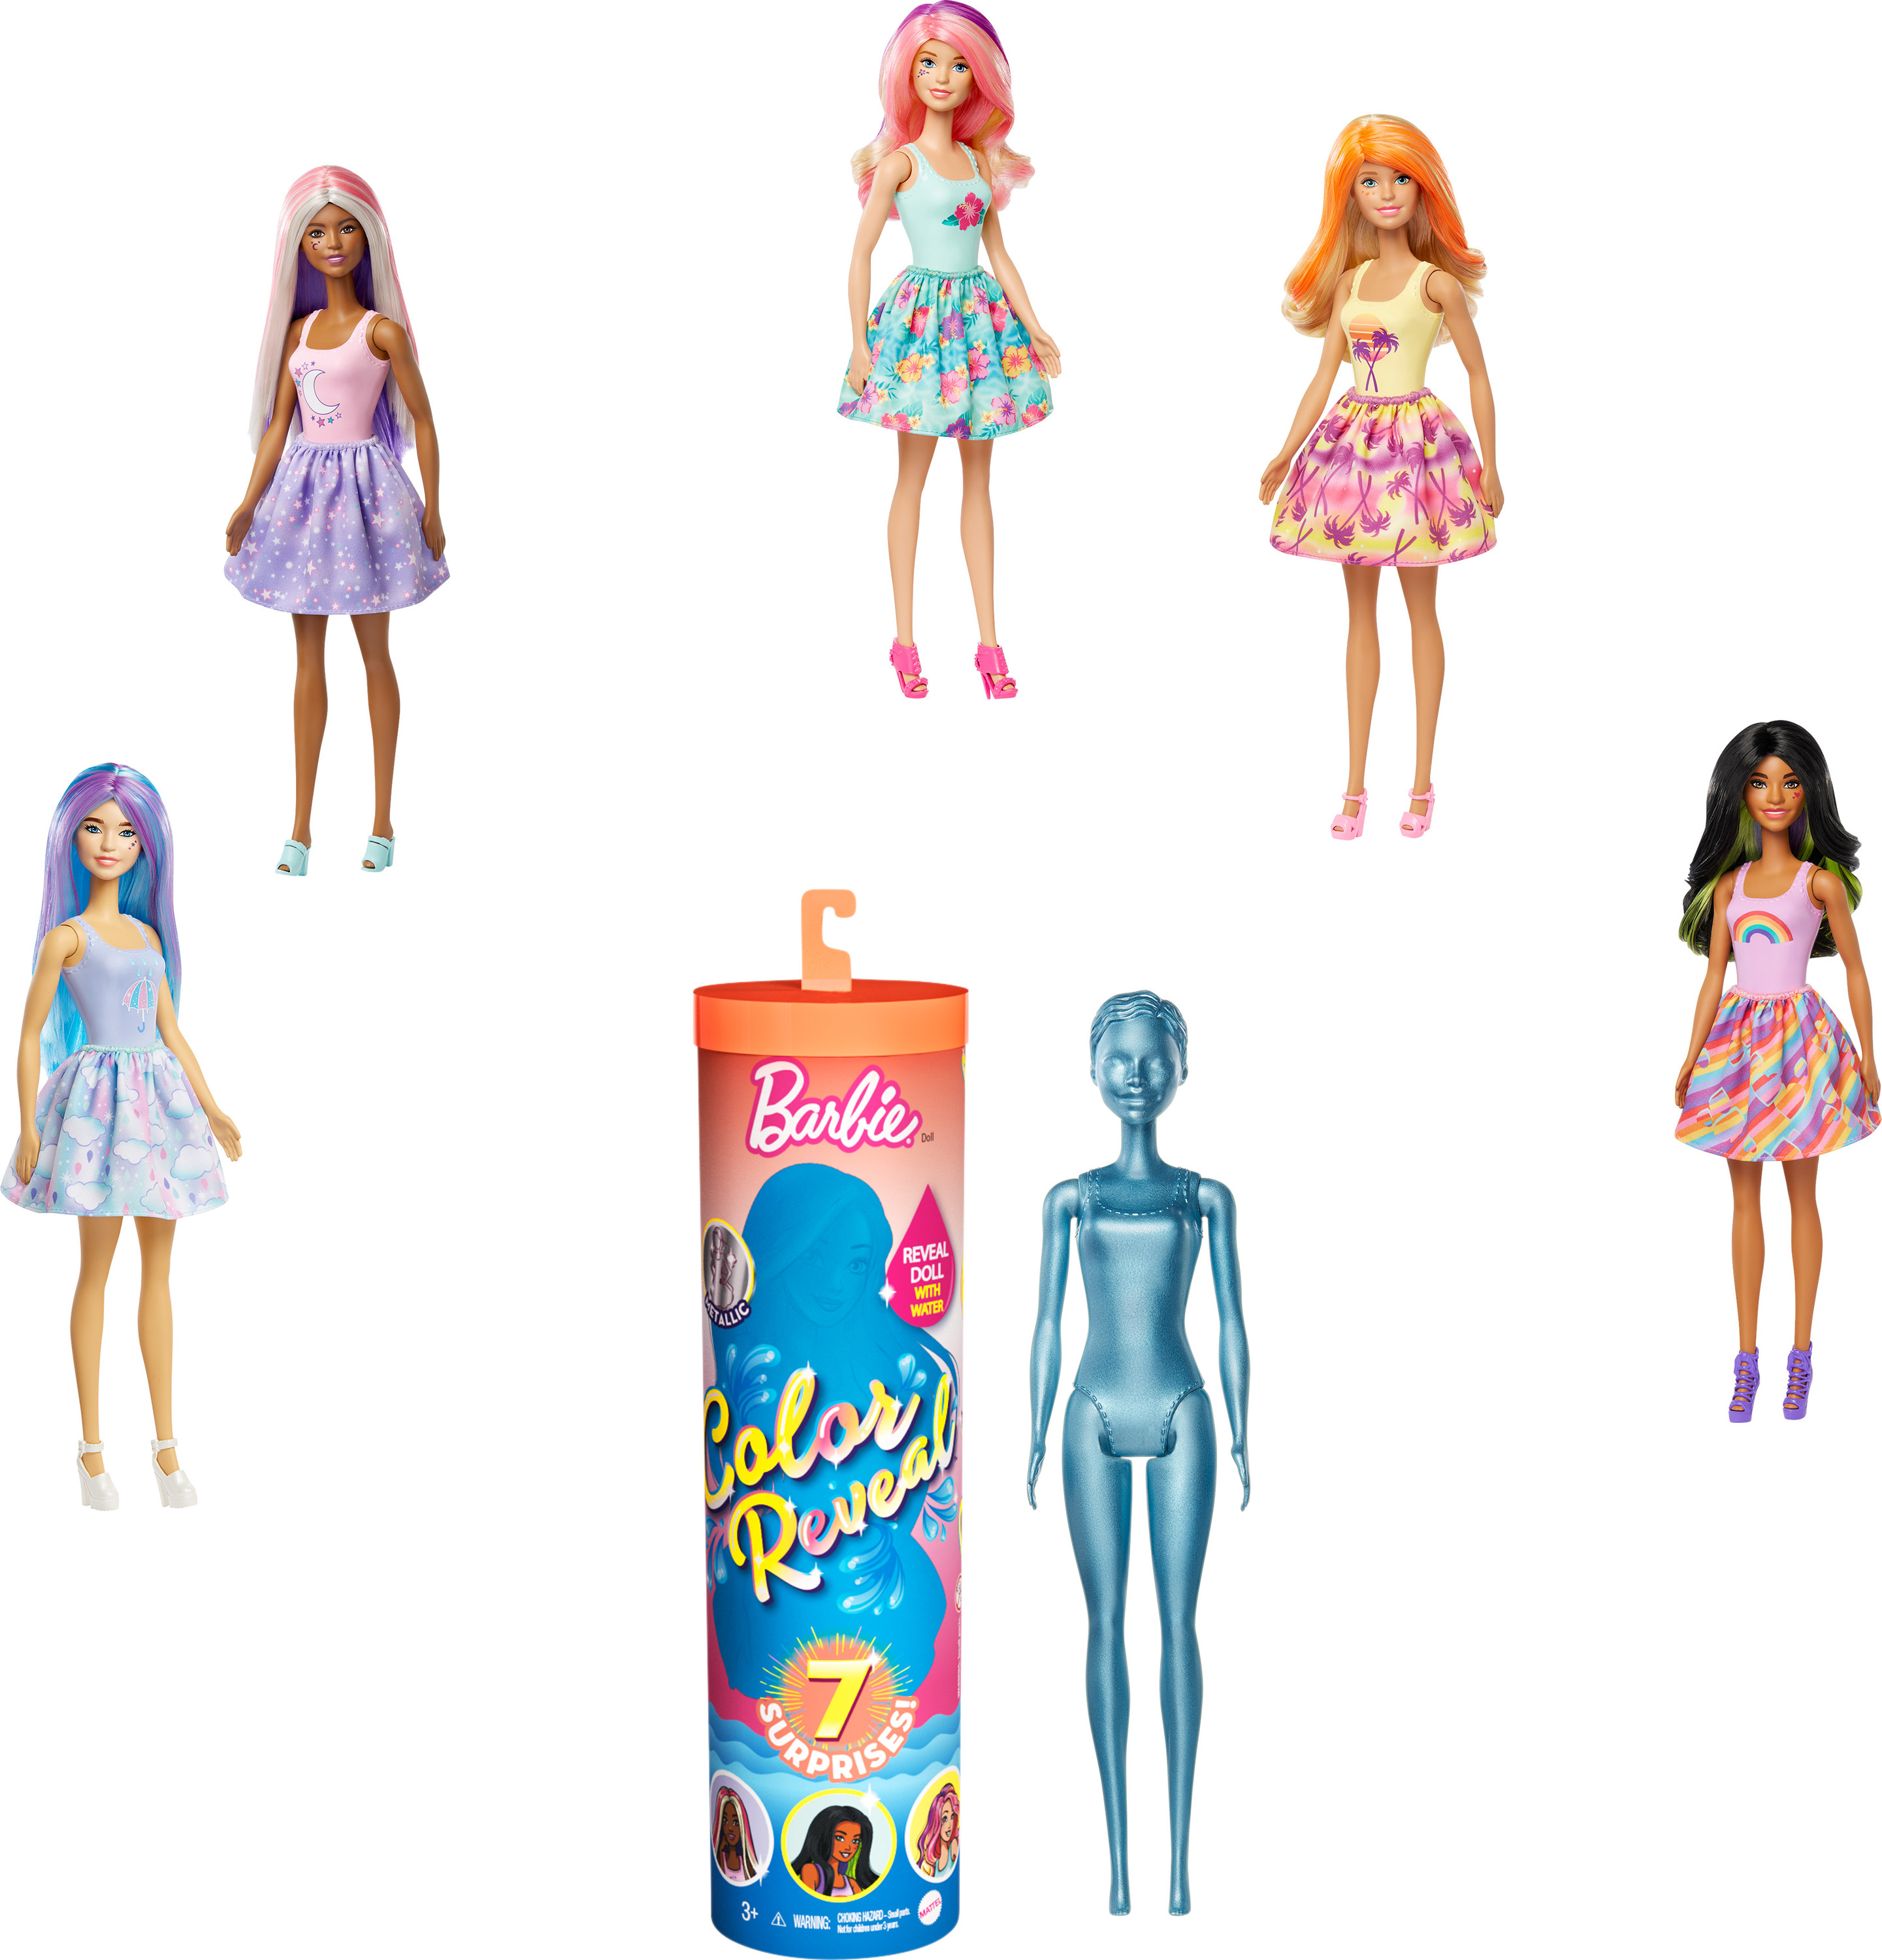 Barbie Color Reveal Doll With 7 Surprises (Styles May Vary) - image 1 of 7